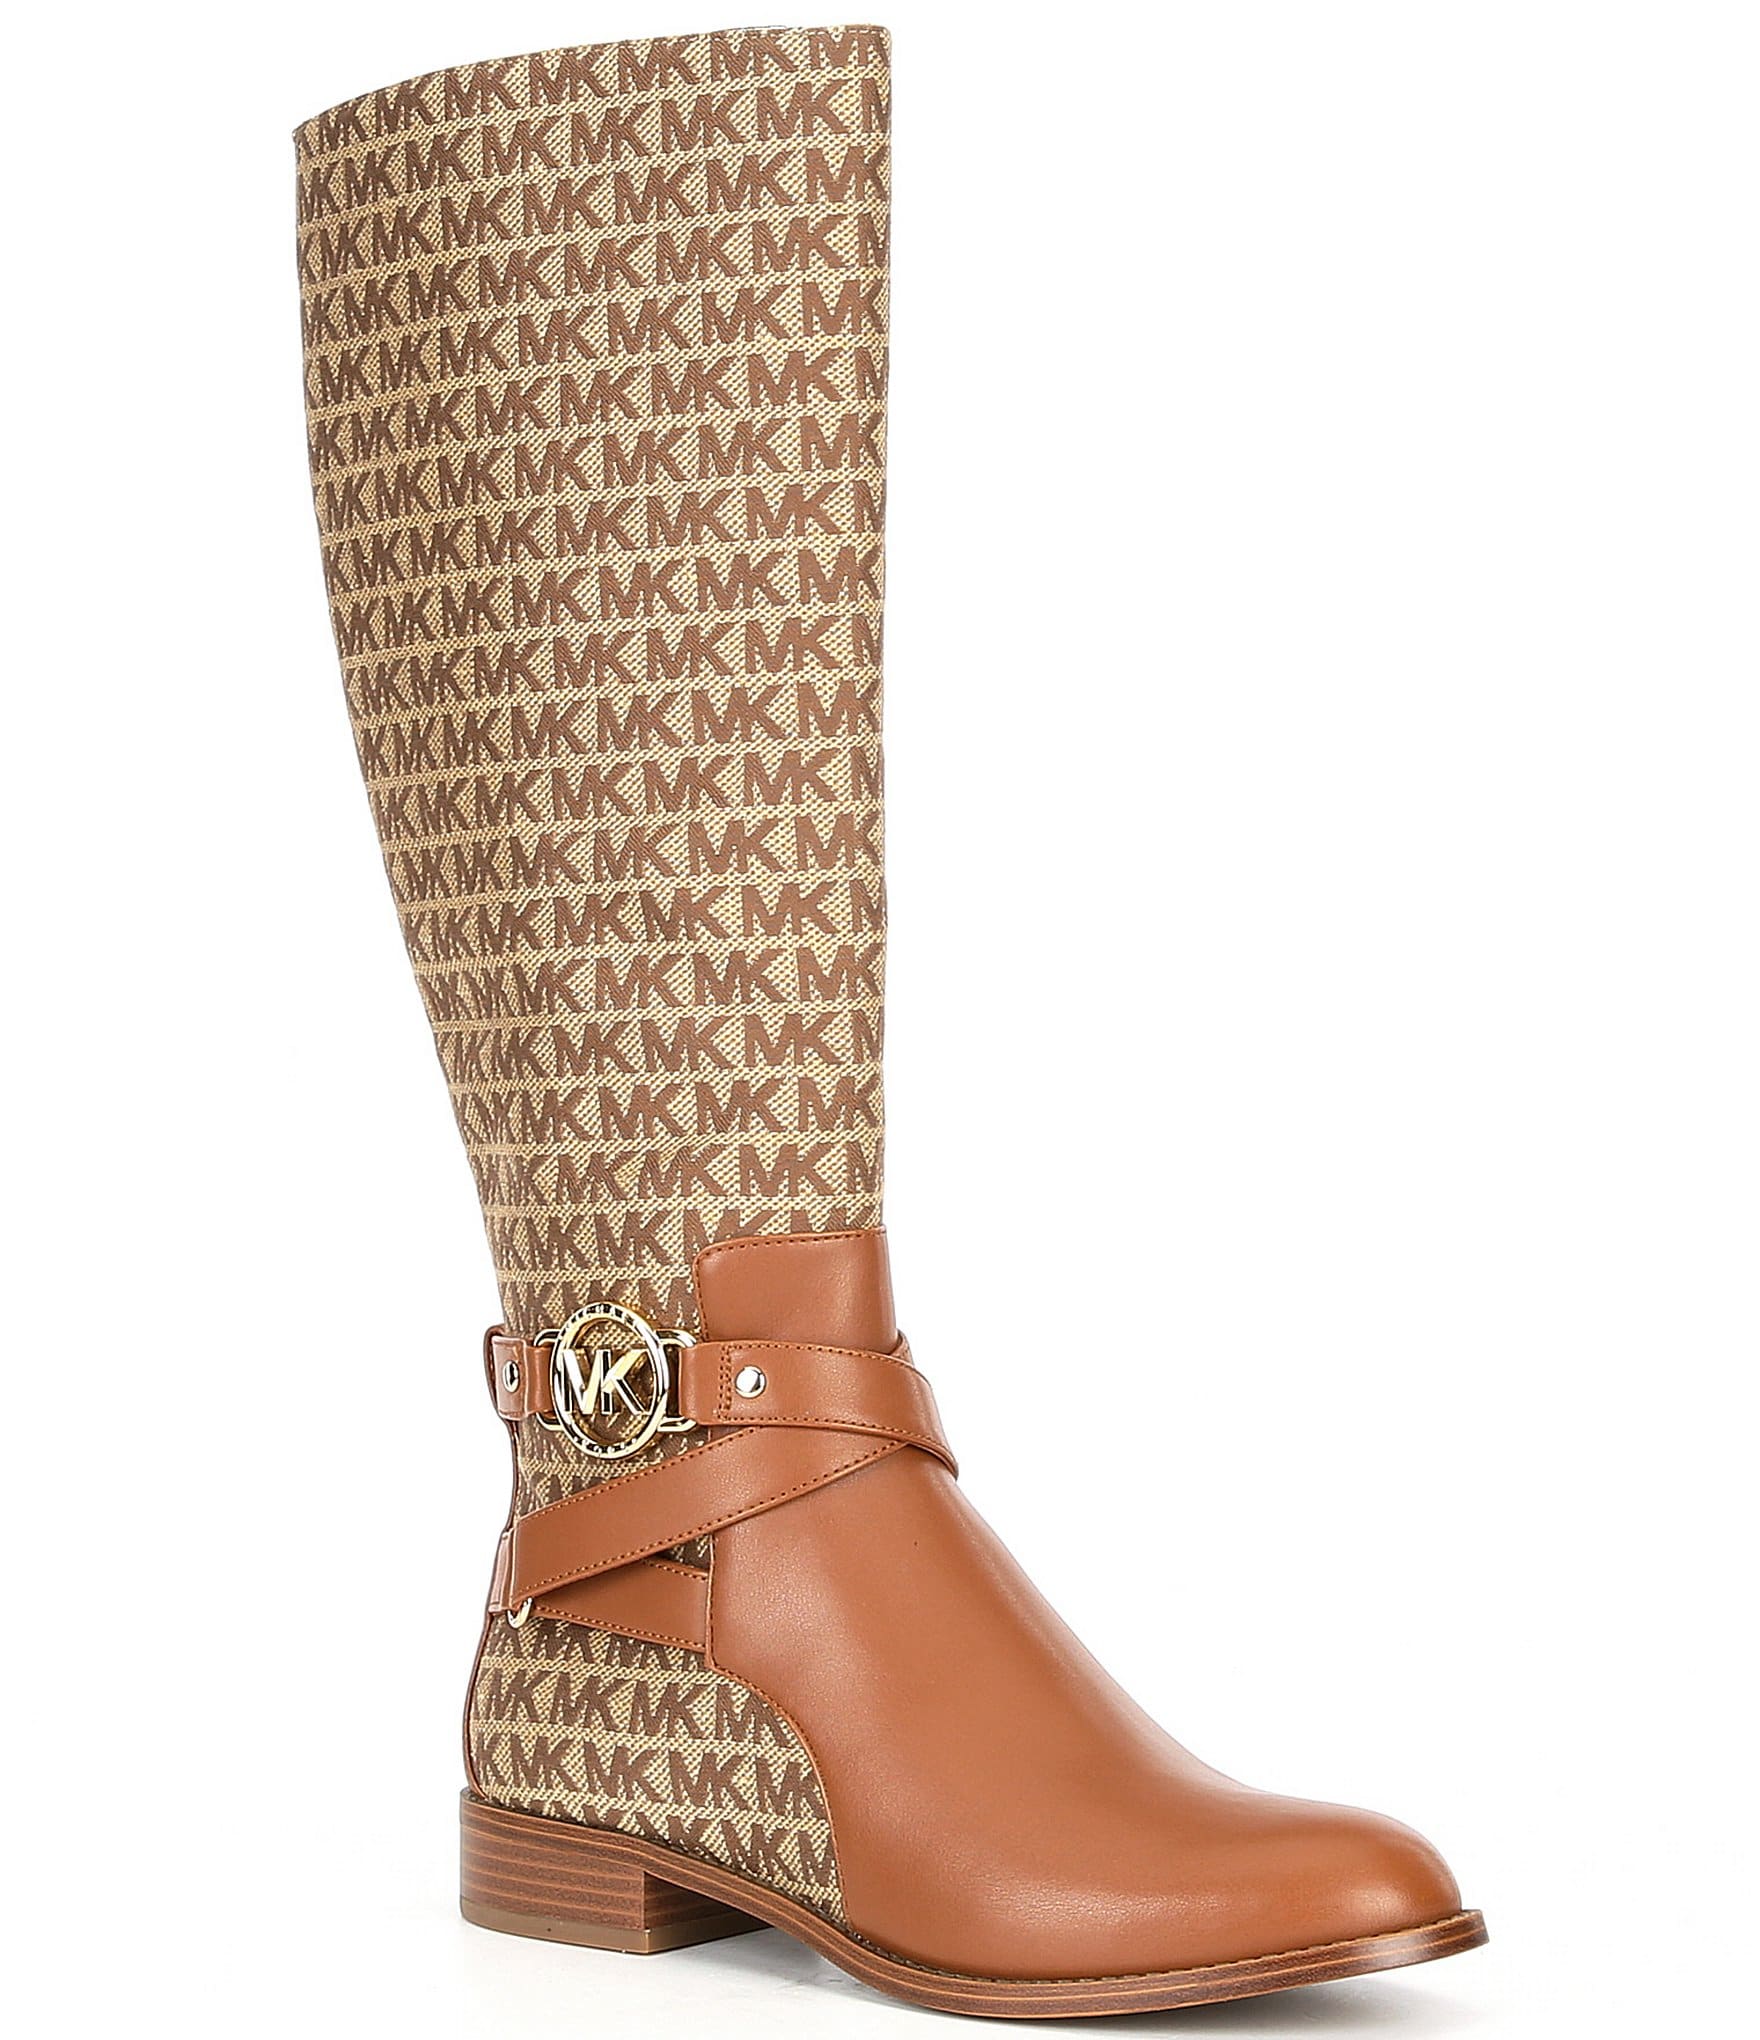 Total 31+ imagen michael kors boots new collection - Abzlocal.mx